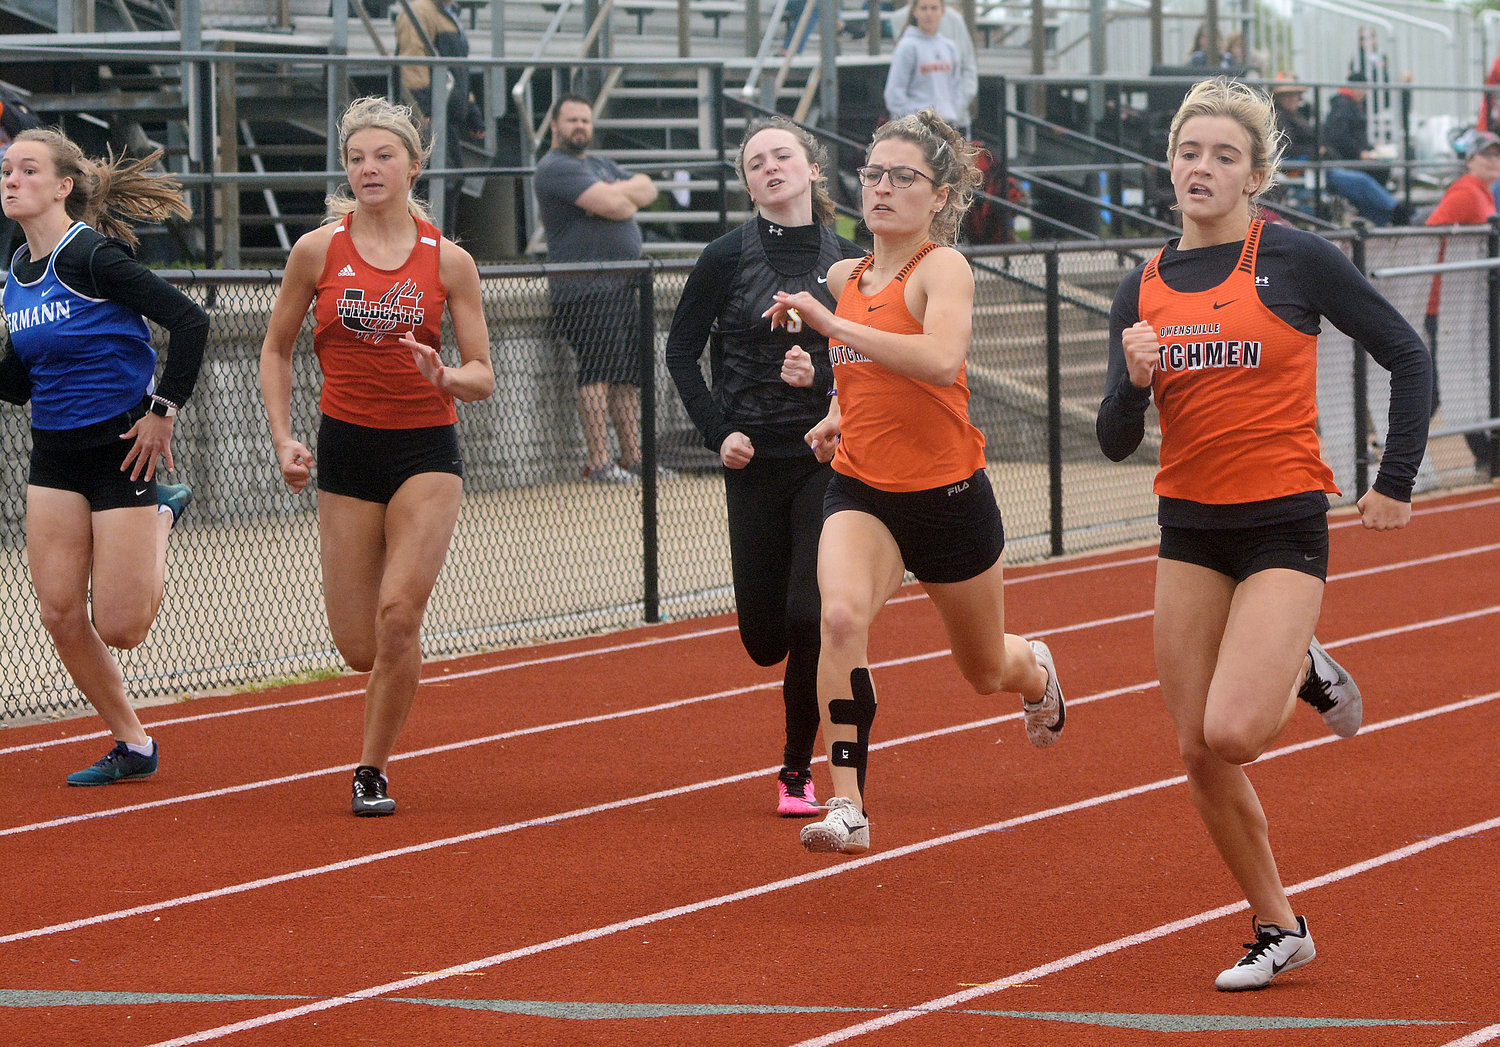 Saylor Richardson and Emma Daniels (far right) race side by side in the finals of the varsity girls 100-meter dash during Monday’s Four Rivers Conference (FRC) Track Meet at Owensville High School’s Dutchmen Field under rainy weather conditions. Daniels won the race with Richardson placing second giving the Dutchgirls a quick 18 team points early in the meet.